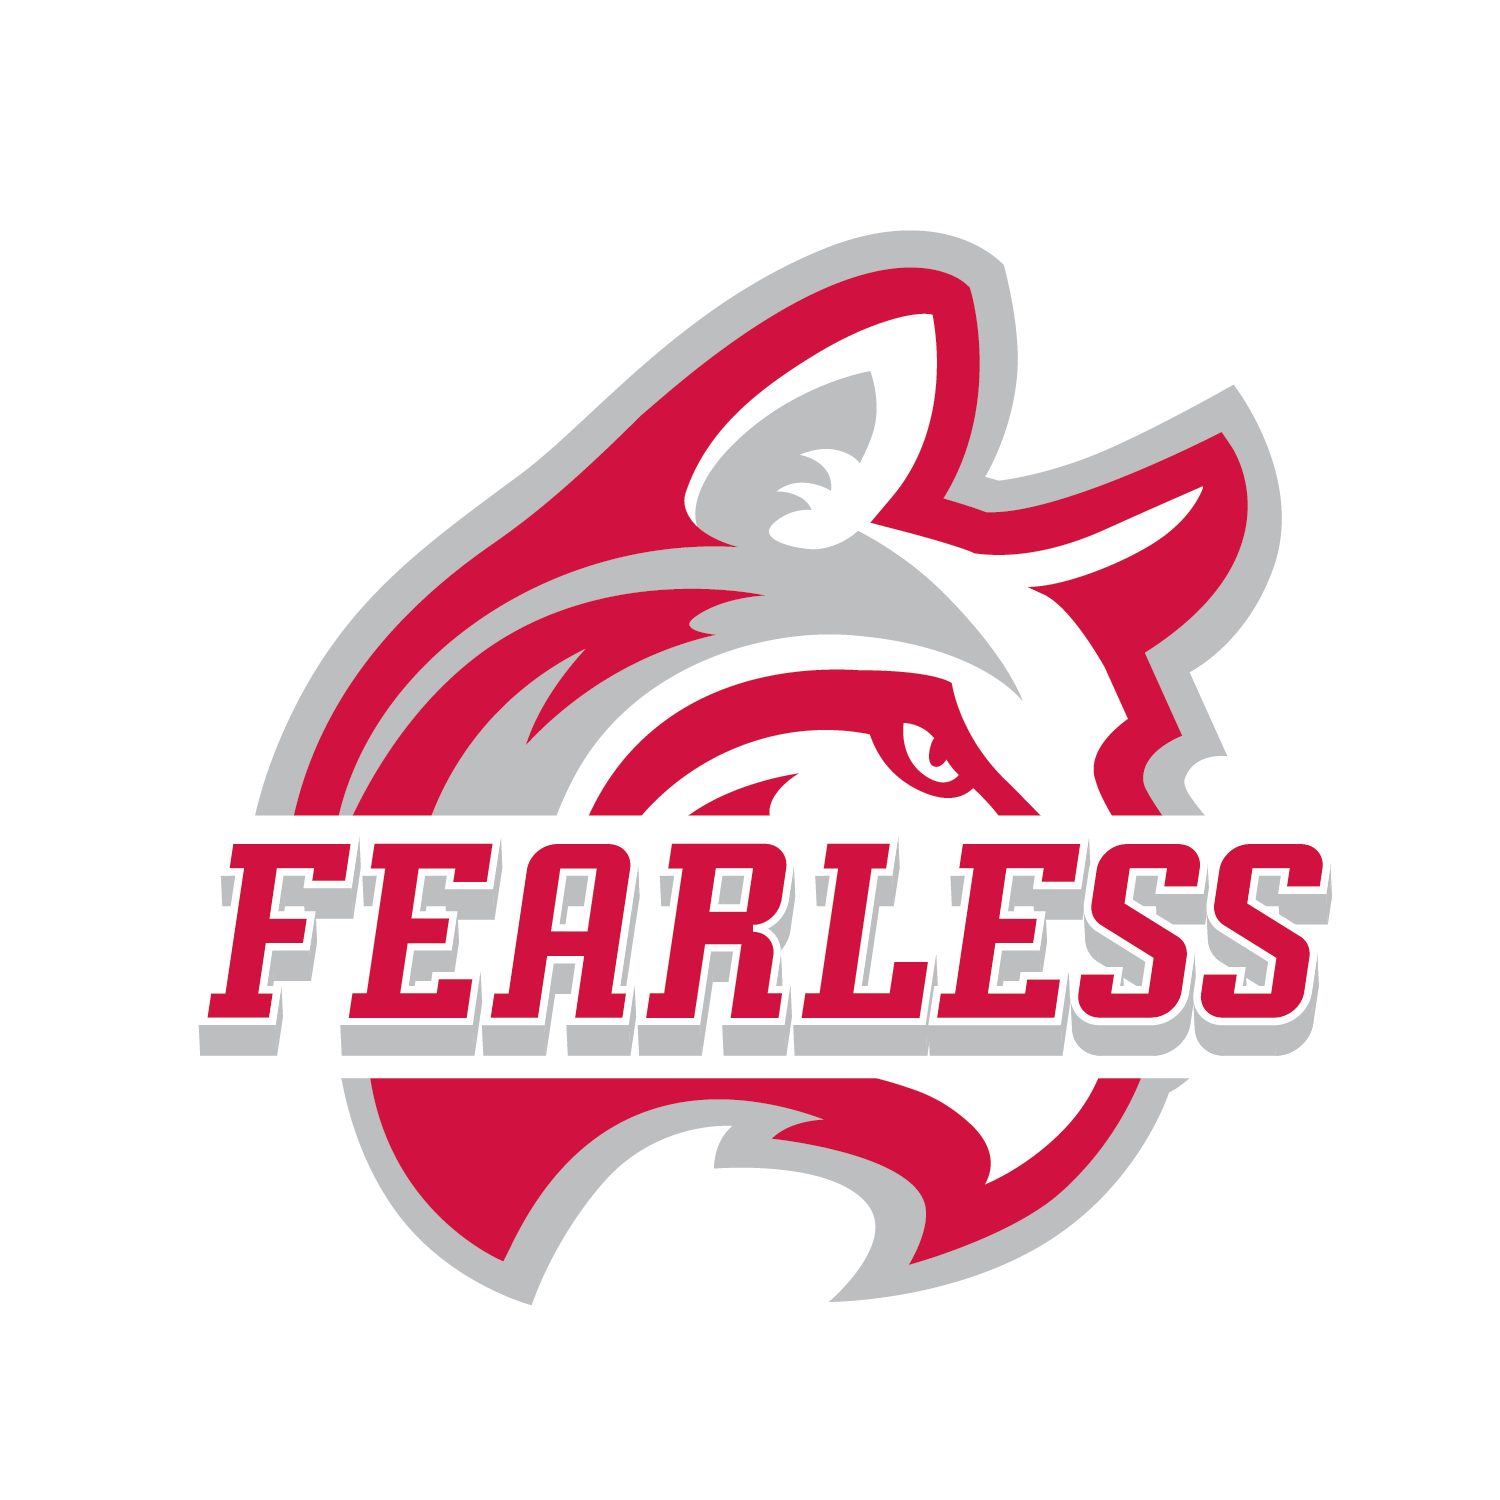 Fearless Logo - Fearless (image in Collection)